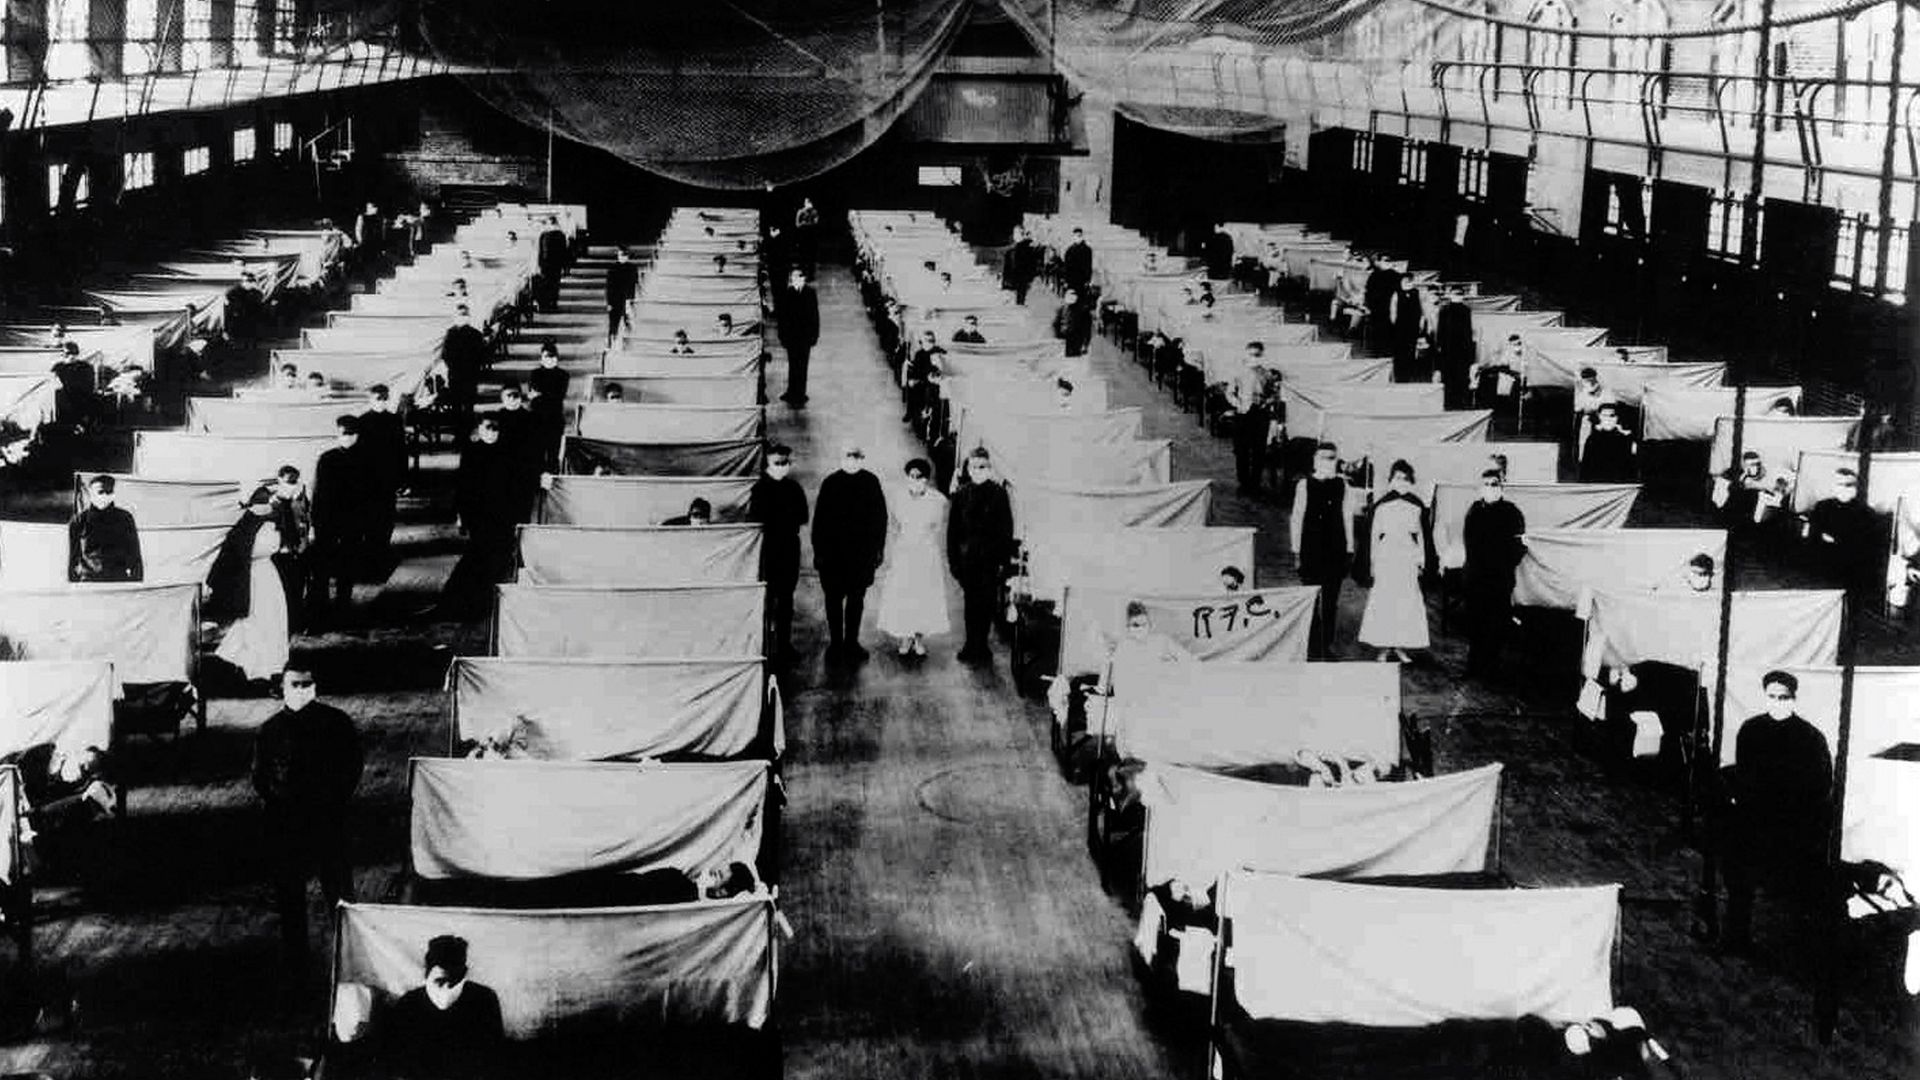 Warehouses that were converted to keep the infected people quarantined.